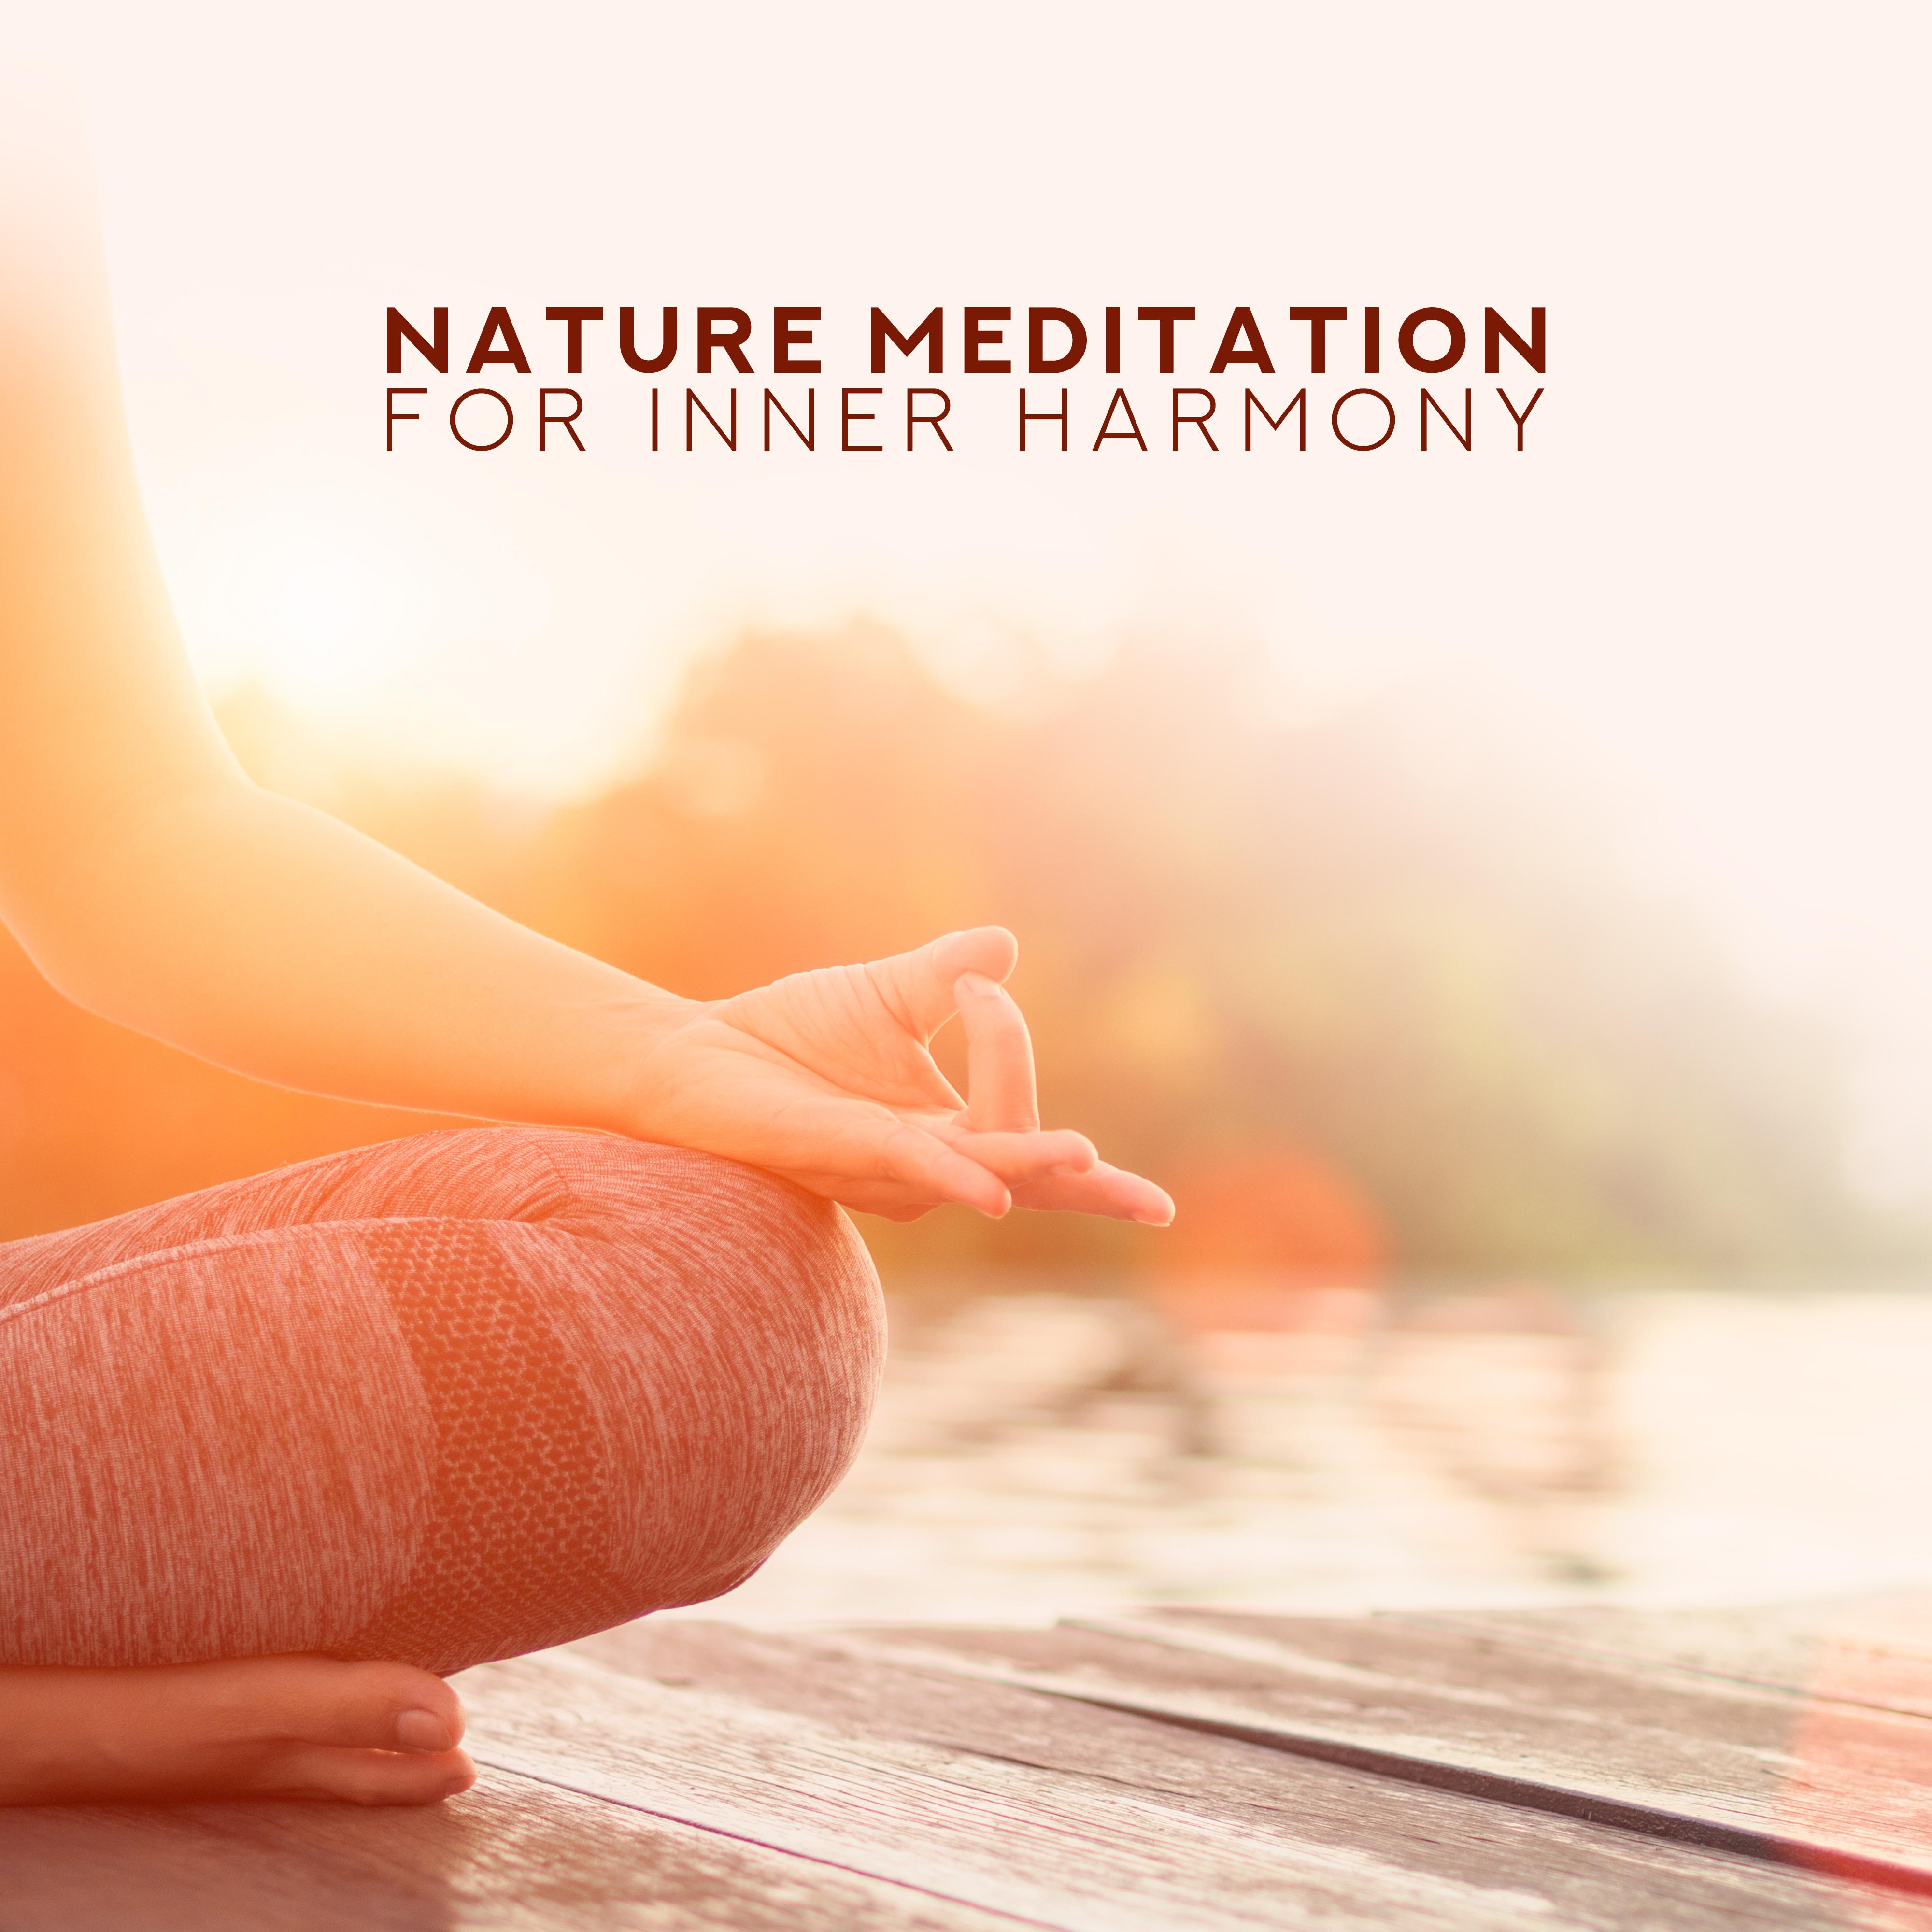 Nature Meditation for Inner Harmony: 2019 New Age Nature Music with Piano & Guitar Melodies, Collection of Best Tracks for Deep Yoga & Relaxation